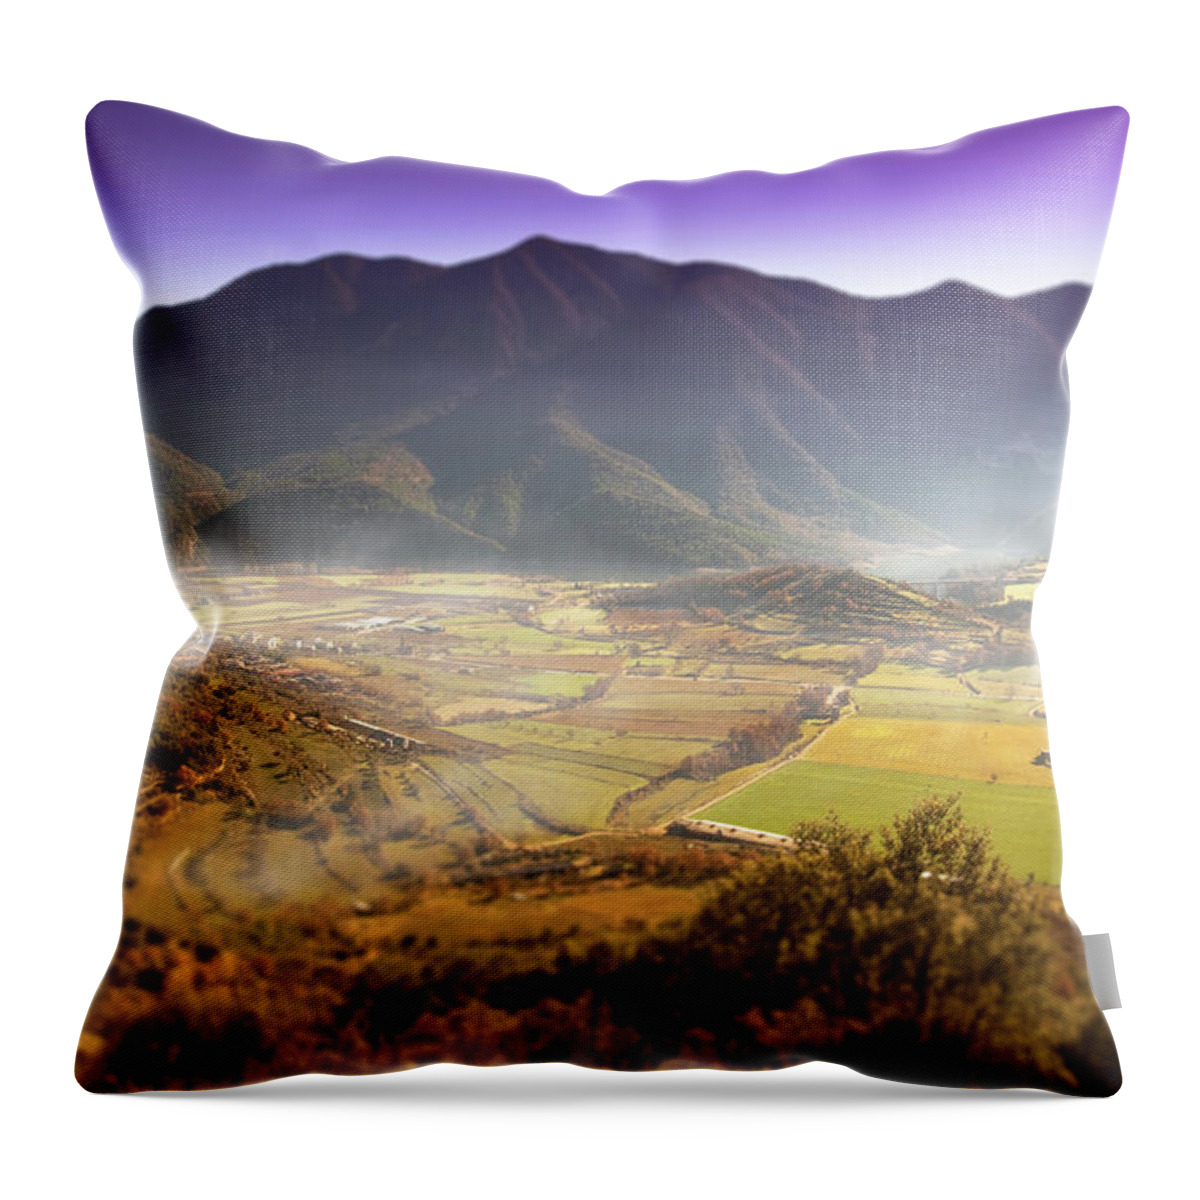 Scenics Throw Pillow featuring the photograph Pyrenees Valley With Fog At Morning by Artur Debat